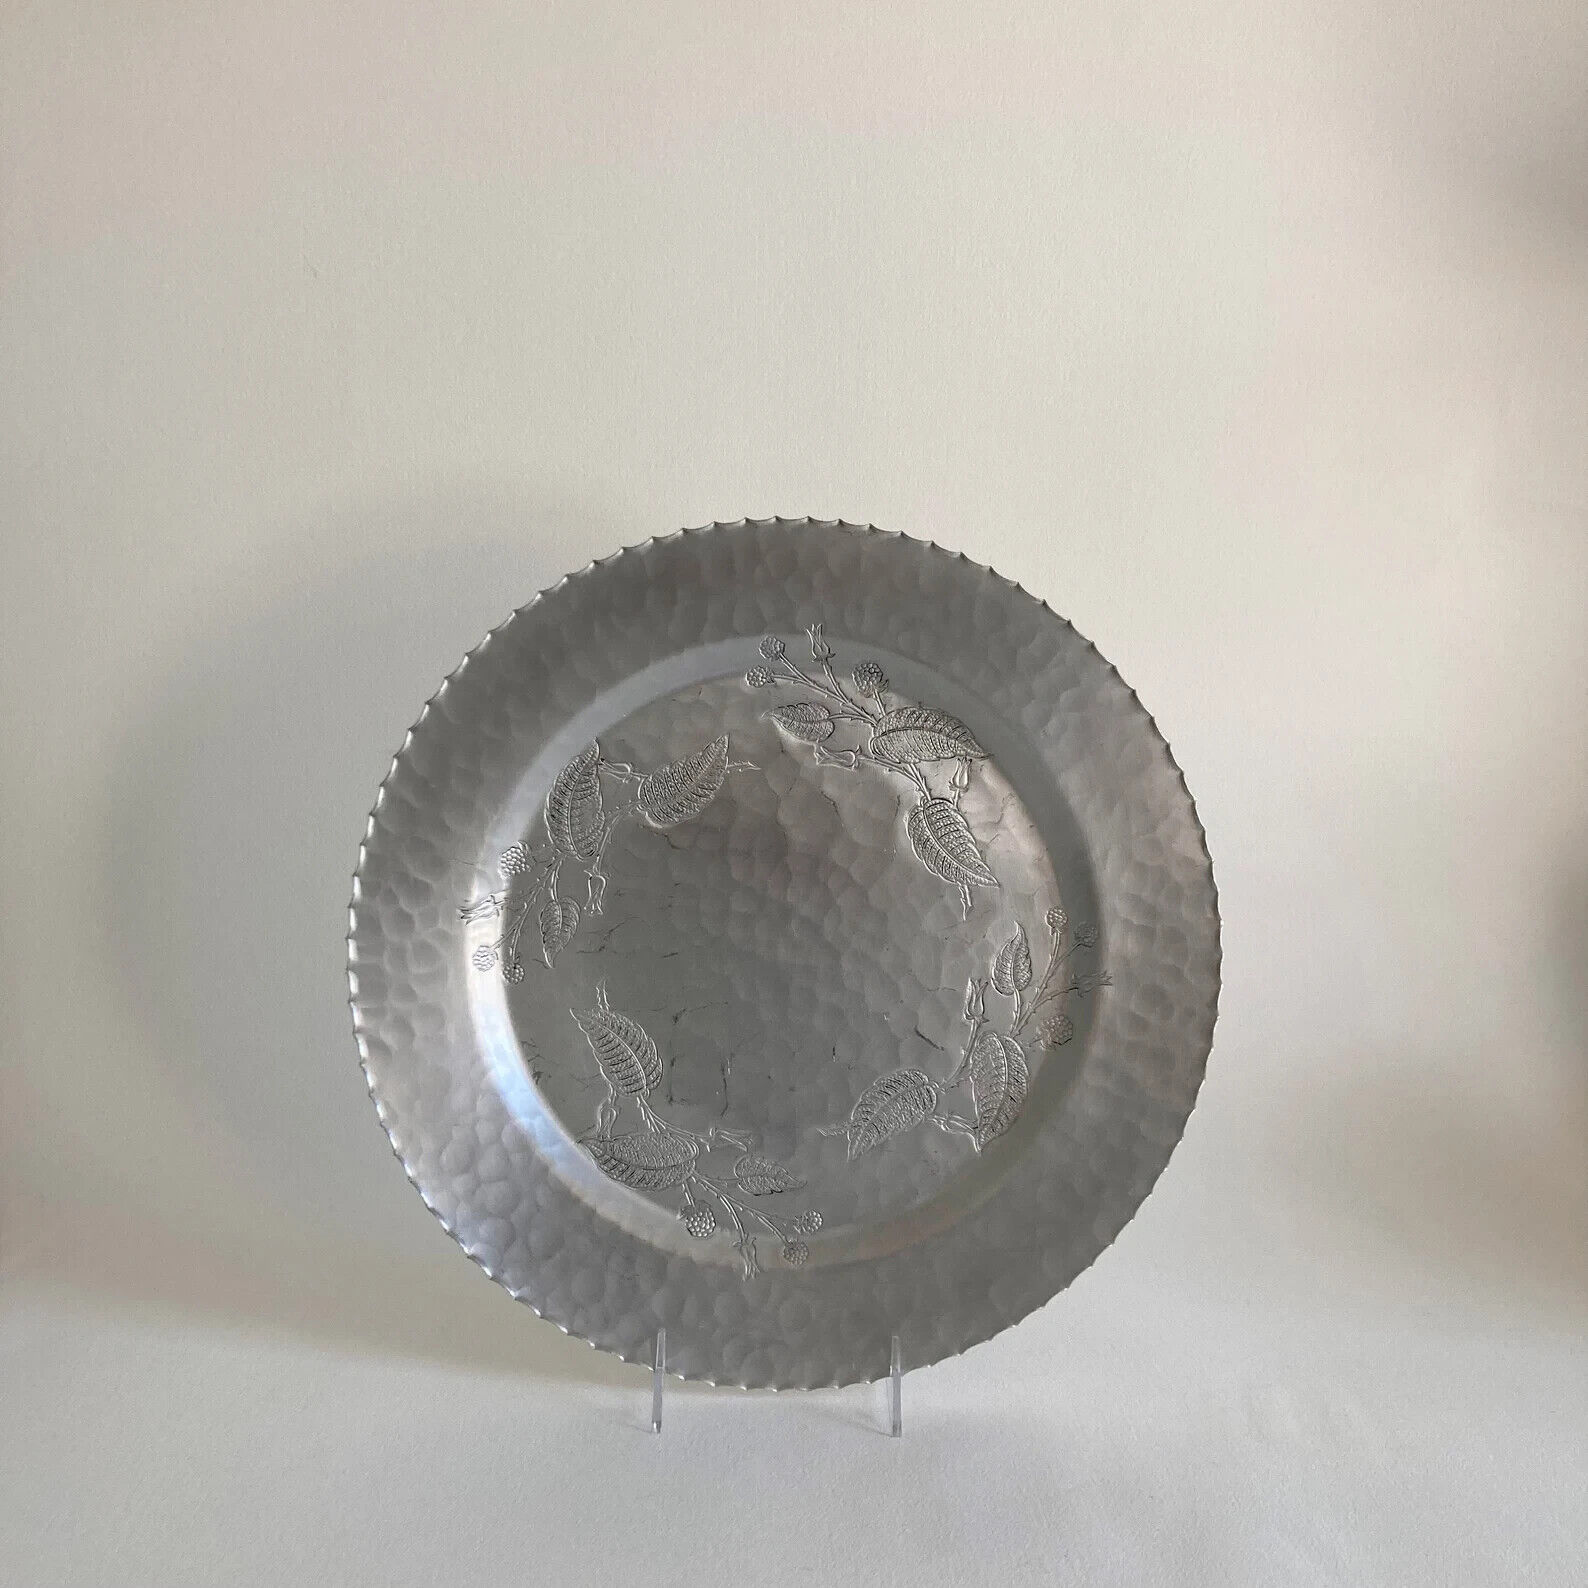 1930s to 1950s, Wrought Farberware Aluminum Large Plate Charger w/Floral Pattern